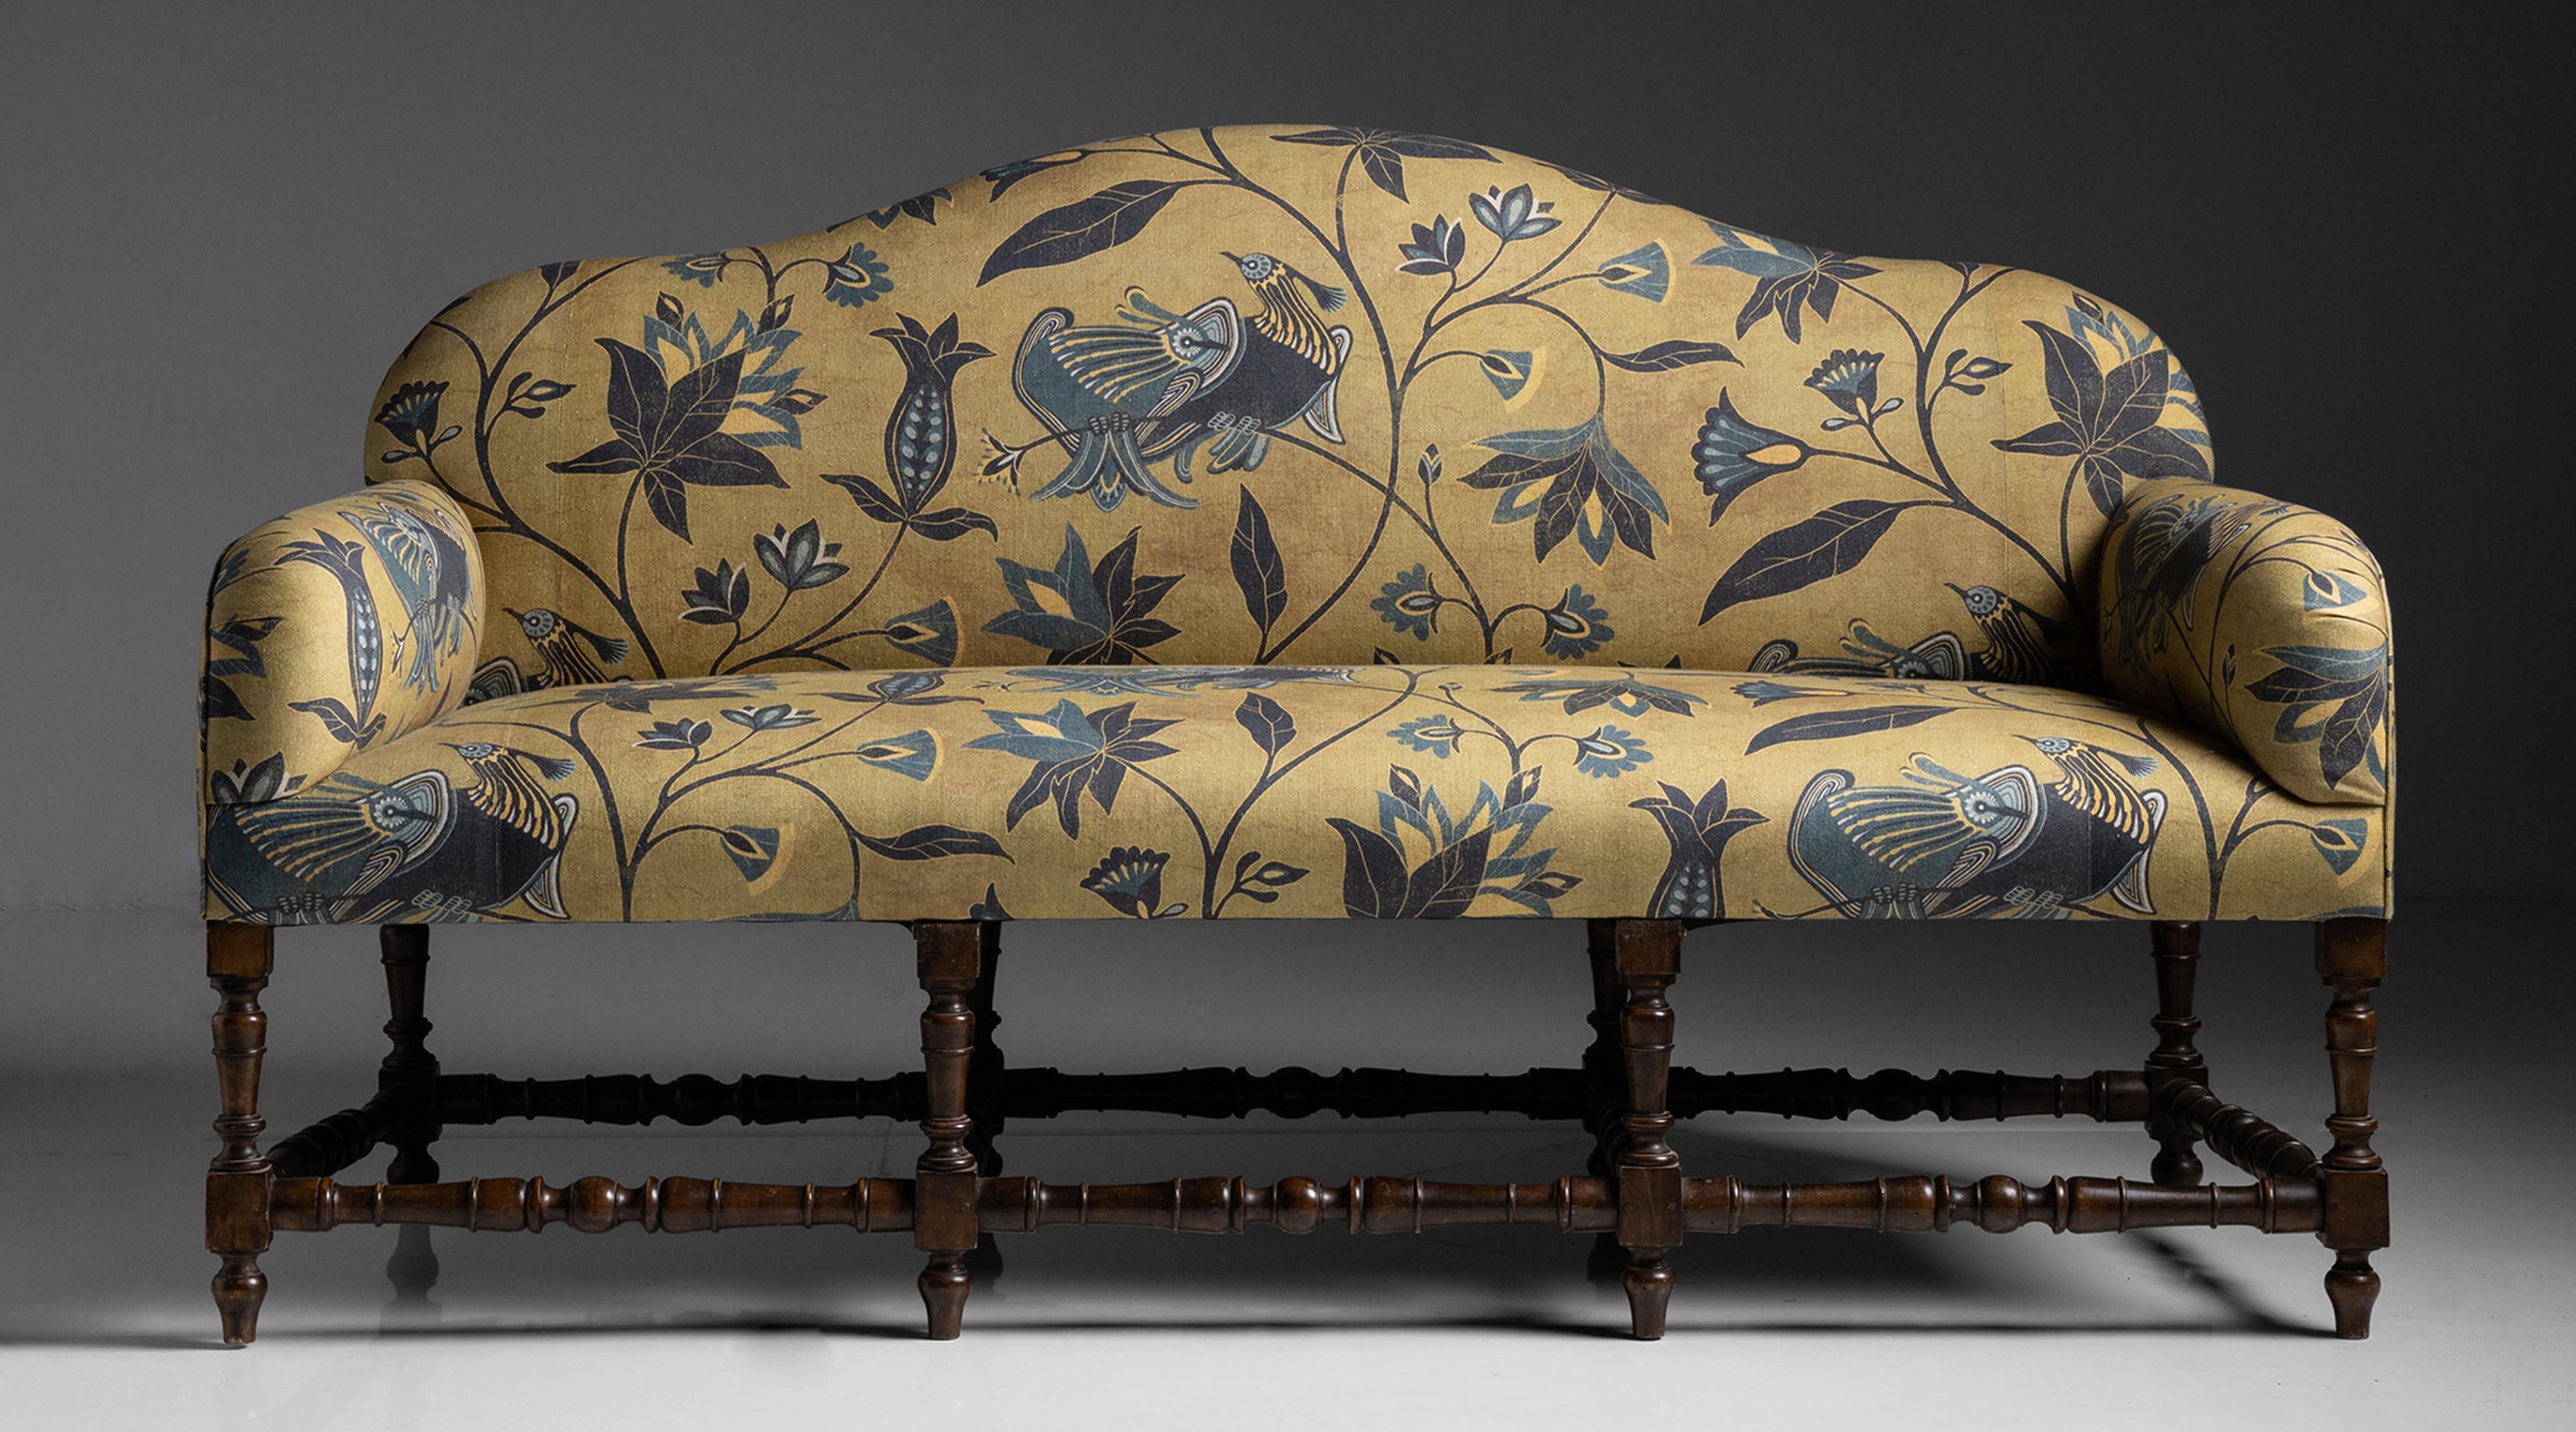 19th Century Camelback Sofa in Linen Floral Print by James Malone, Italy, Circa 1860